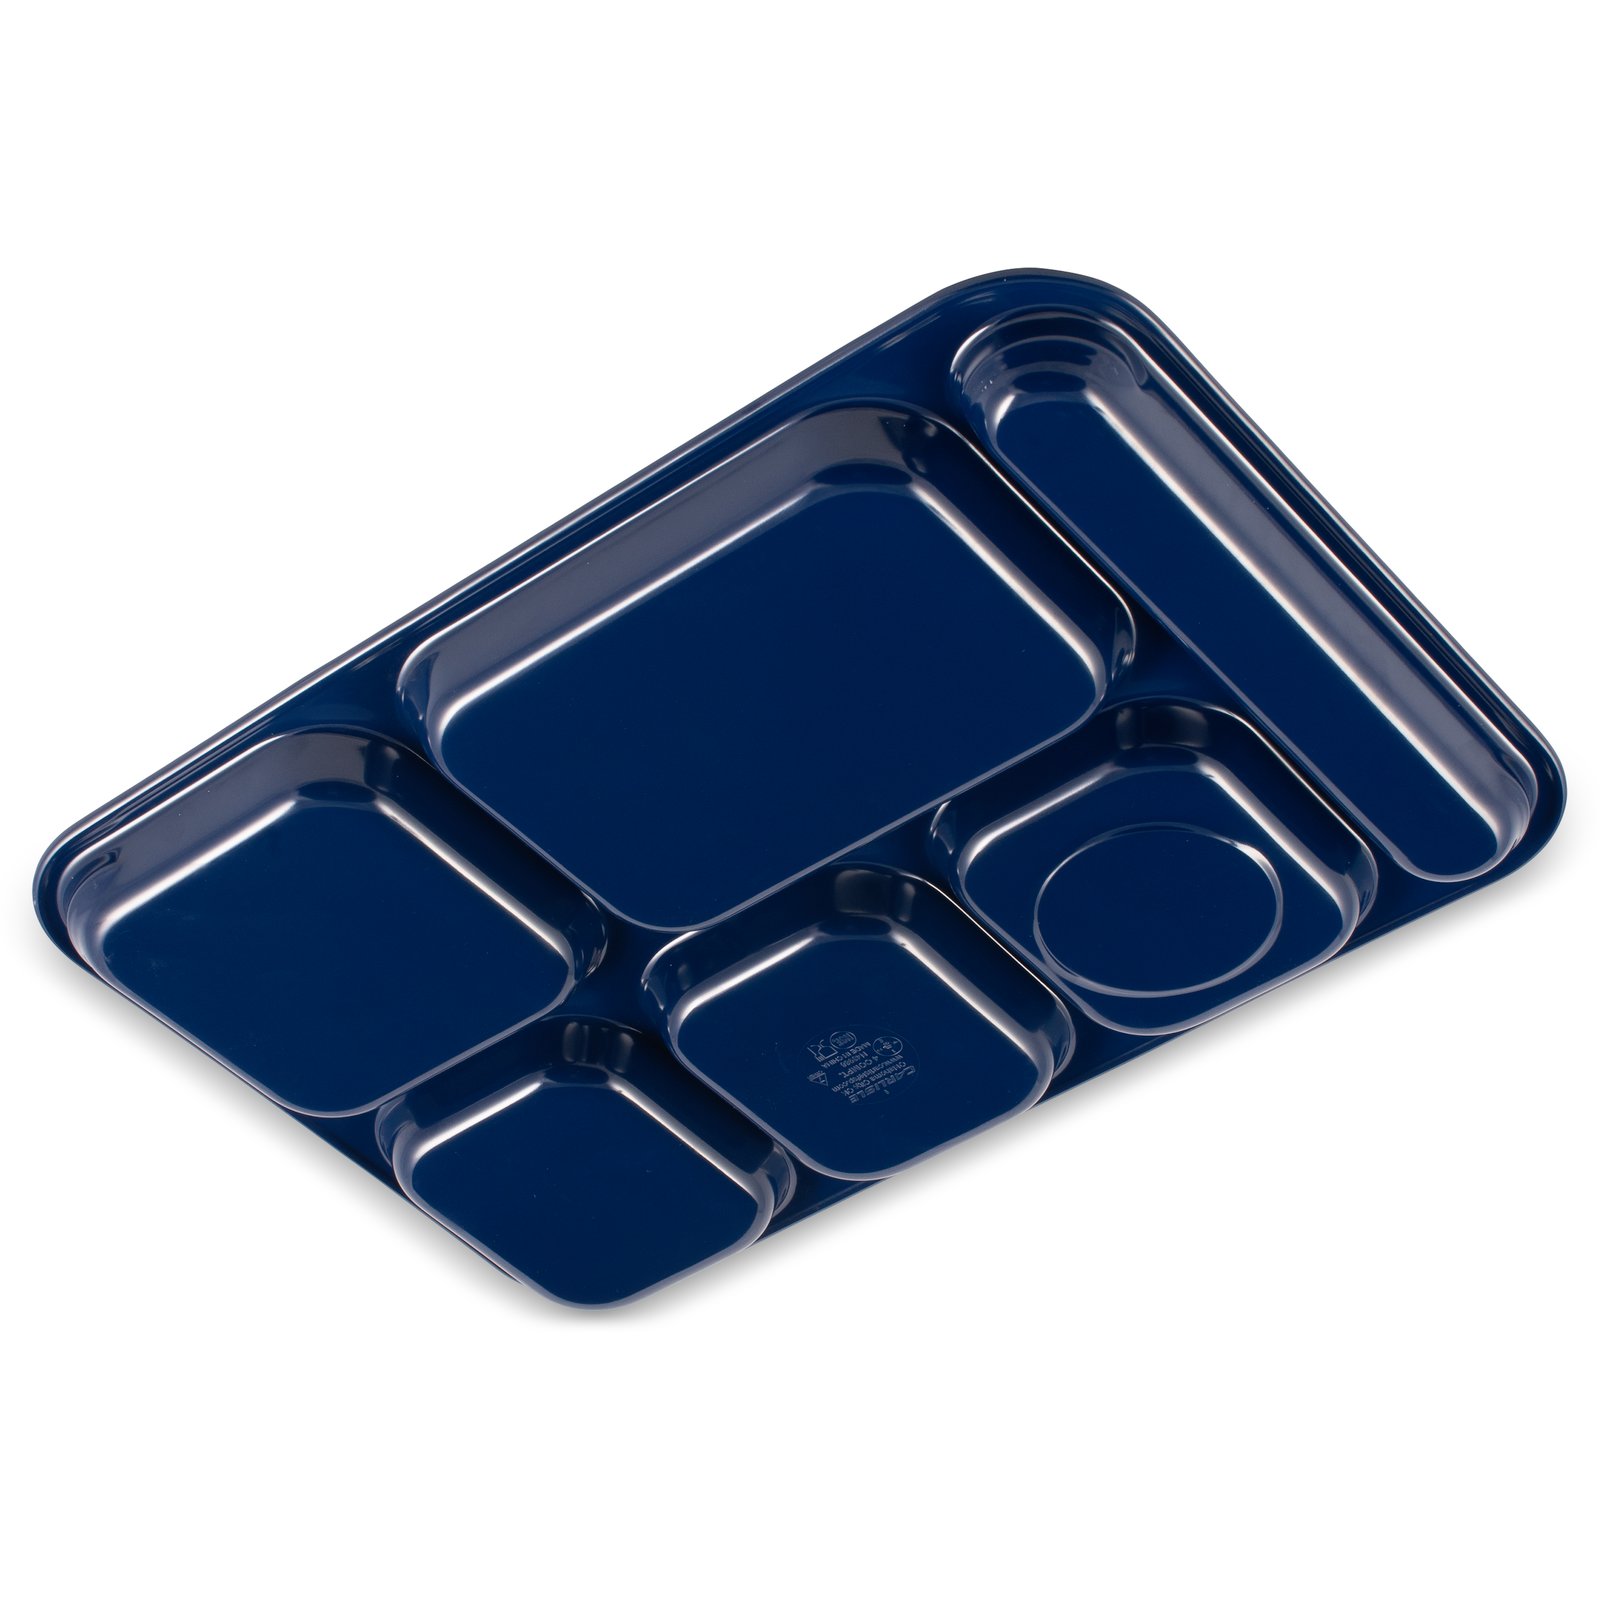 Tabletop Accessories  Carlisle FoodService Products